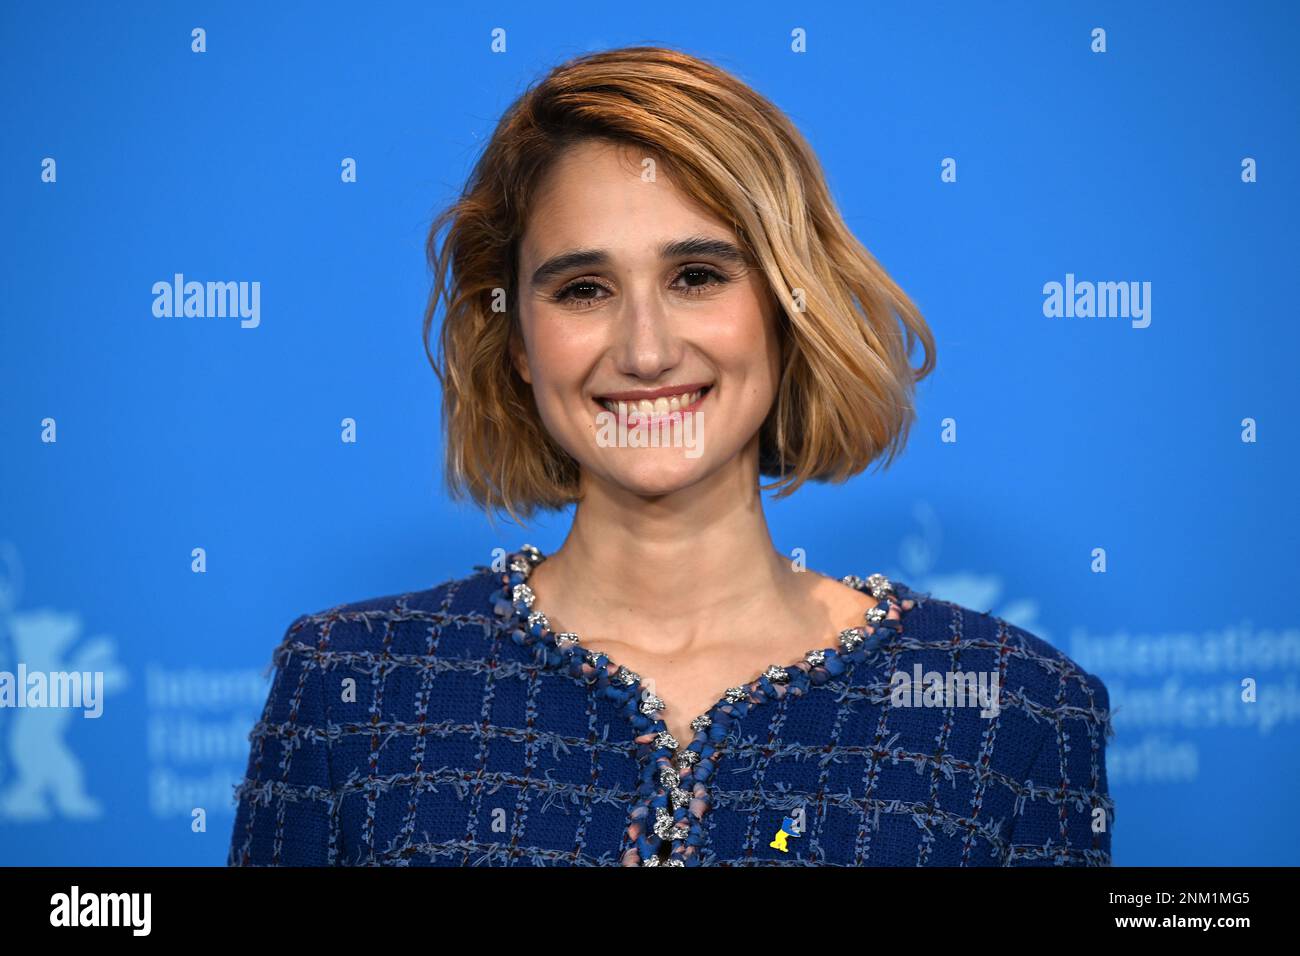 Berlin, Germany. 24th Feb, 2023. Linda Caridi, actress, arrives for the Photo Call of the film 'L'Ultima Notte di Amore' (Last Night of Amore), screening in the Berlinale Special Gala section of the Berlinale. The 73rd International Film Festival will take place in Berlin from 16 - 26.02.2023. Credit: Monika Skolimowska/dpa/Alamy Live News Stock Photo